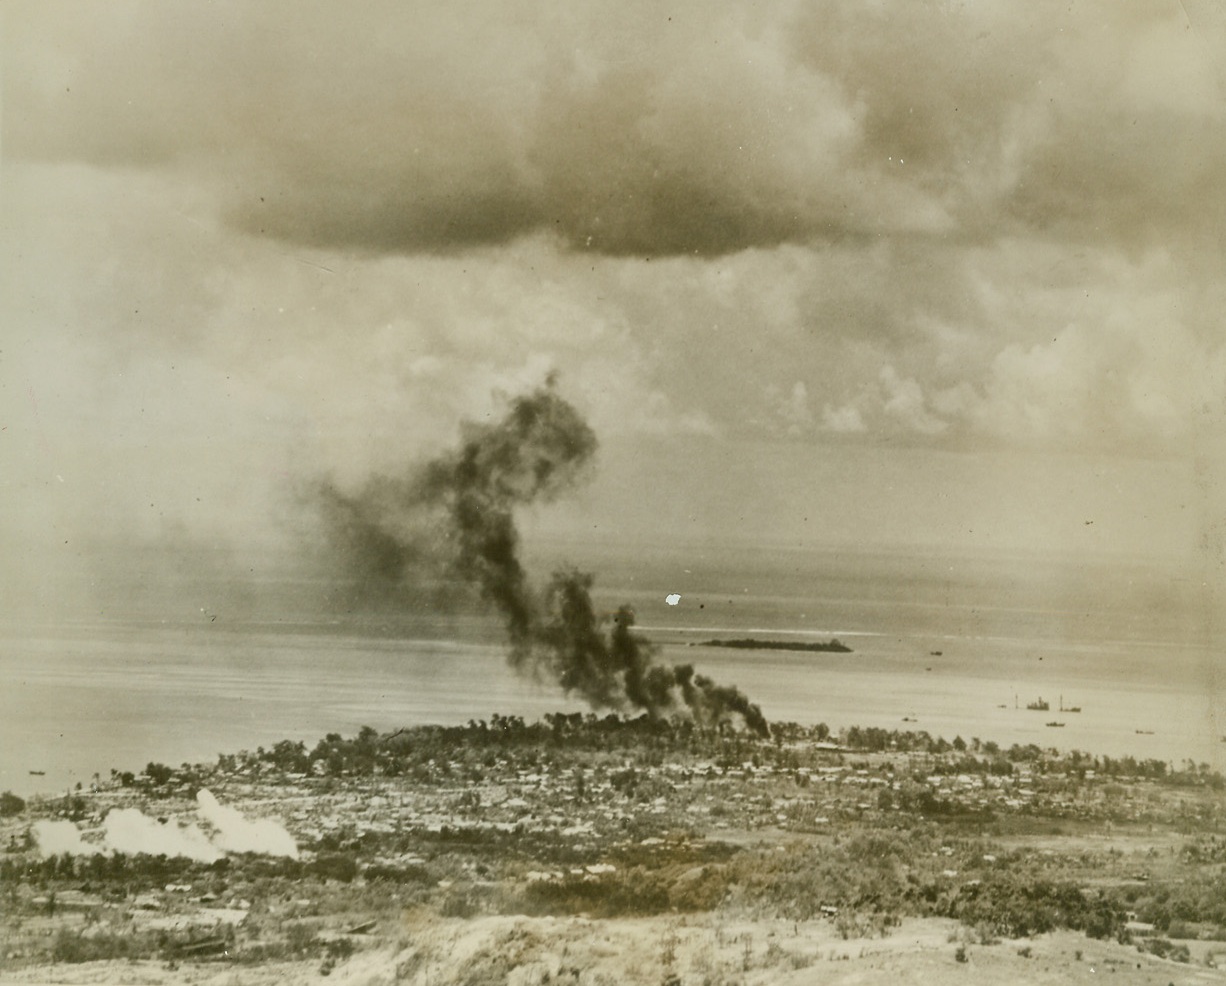 Warships Shell Garapan, 7/5/1944. Garapan, Saipan – Leathernecks from the Second Marine division – the conquerors of Tarawa – were tightening the vise around the city of Garapan, capital of Saipan, when this photo was taken.  Fires in the coastal area were caused by fleet bombardment and sunken Japanese shipping can be seen in the harbor.  Garapan has surrendered and is now in American hands. Credit line (Coast Guard photo from ACME);